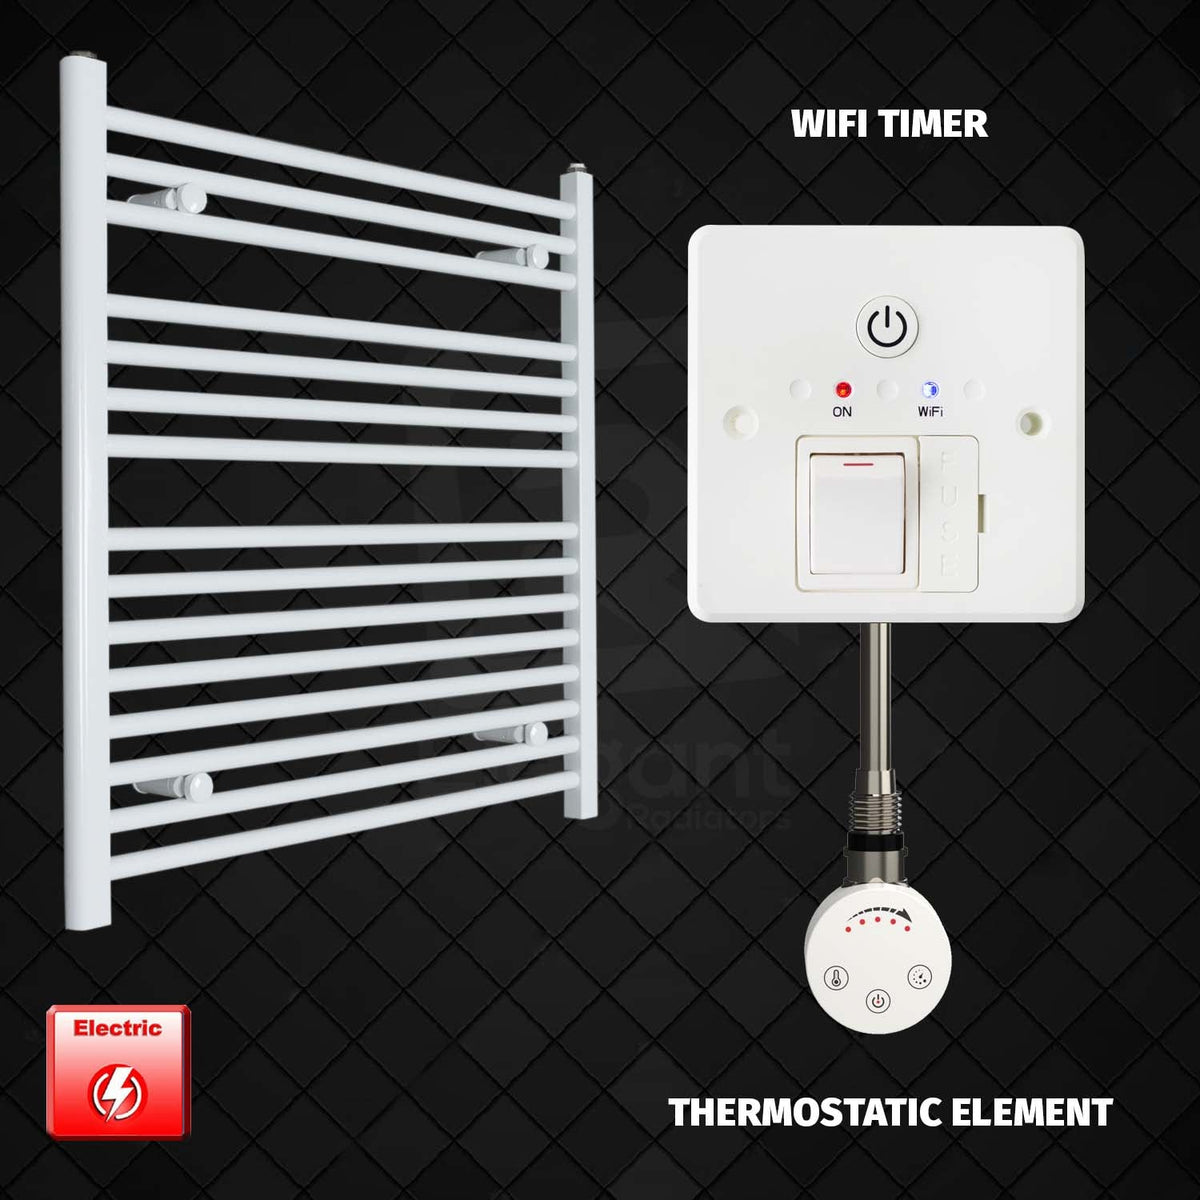 800 x 900 Pre-Filled Electric Heated Towel Radiator White HTR SMR Thermostatic element Wifi timer